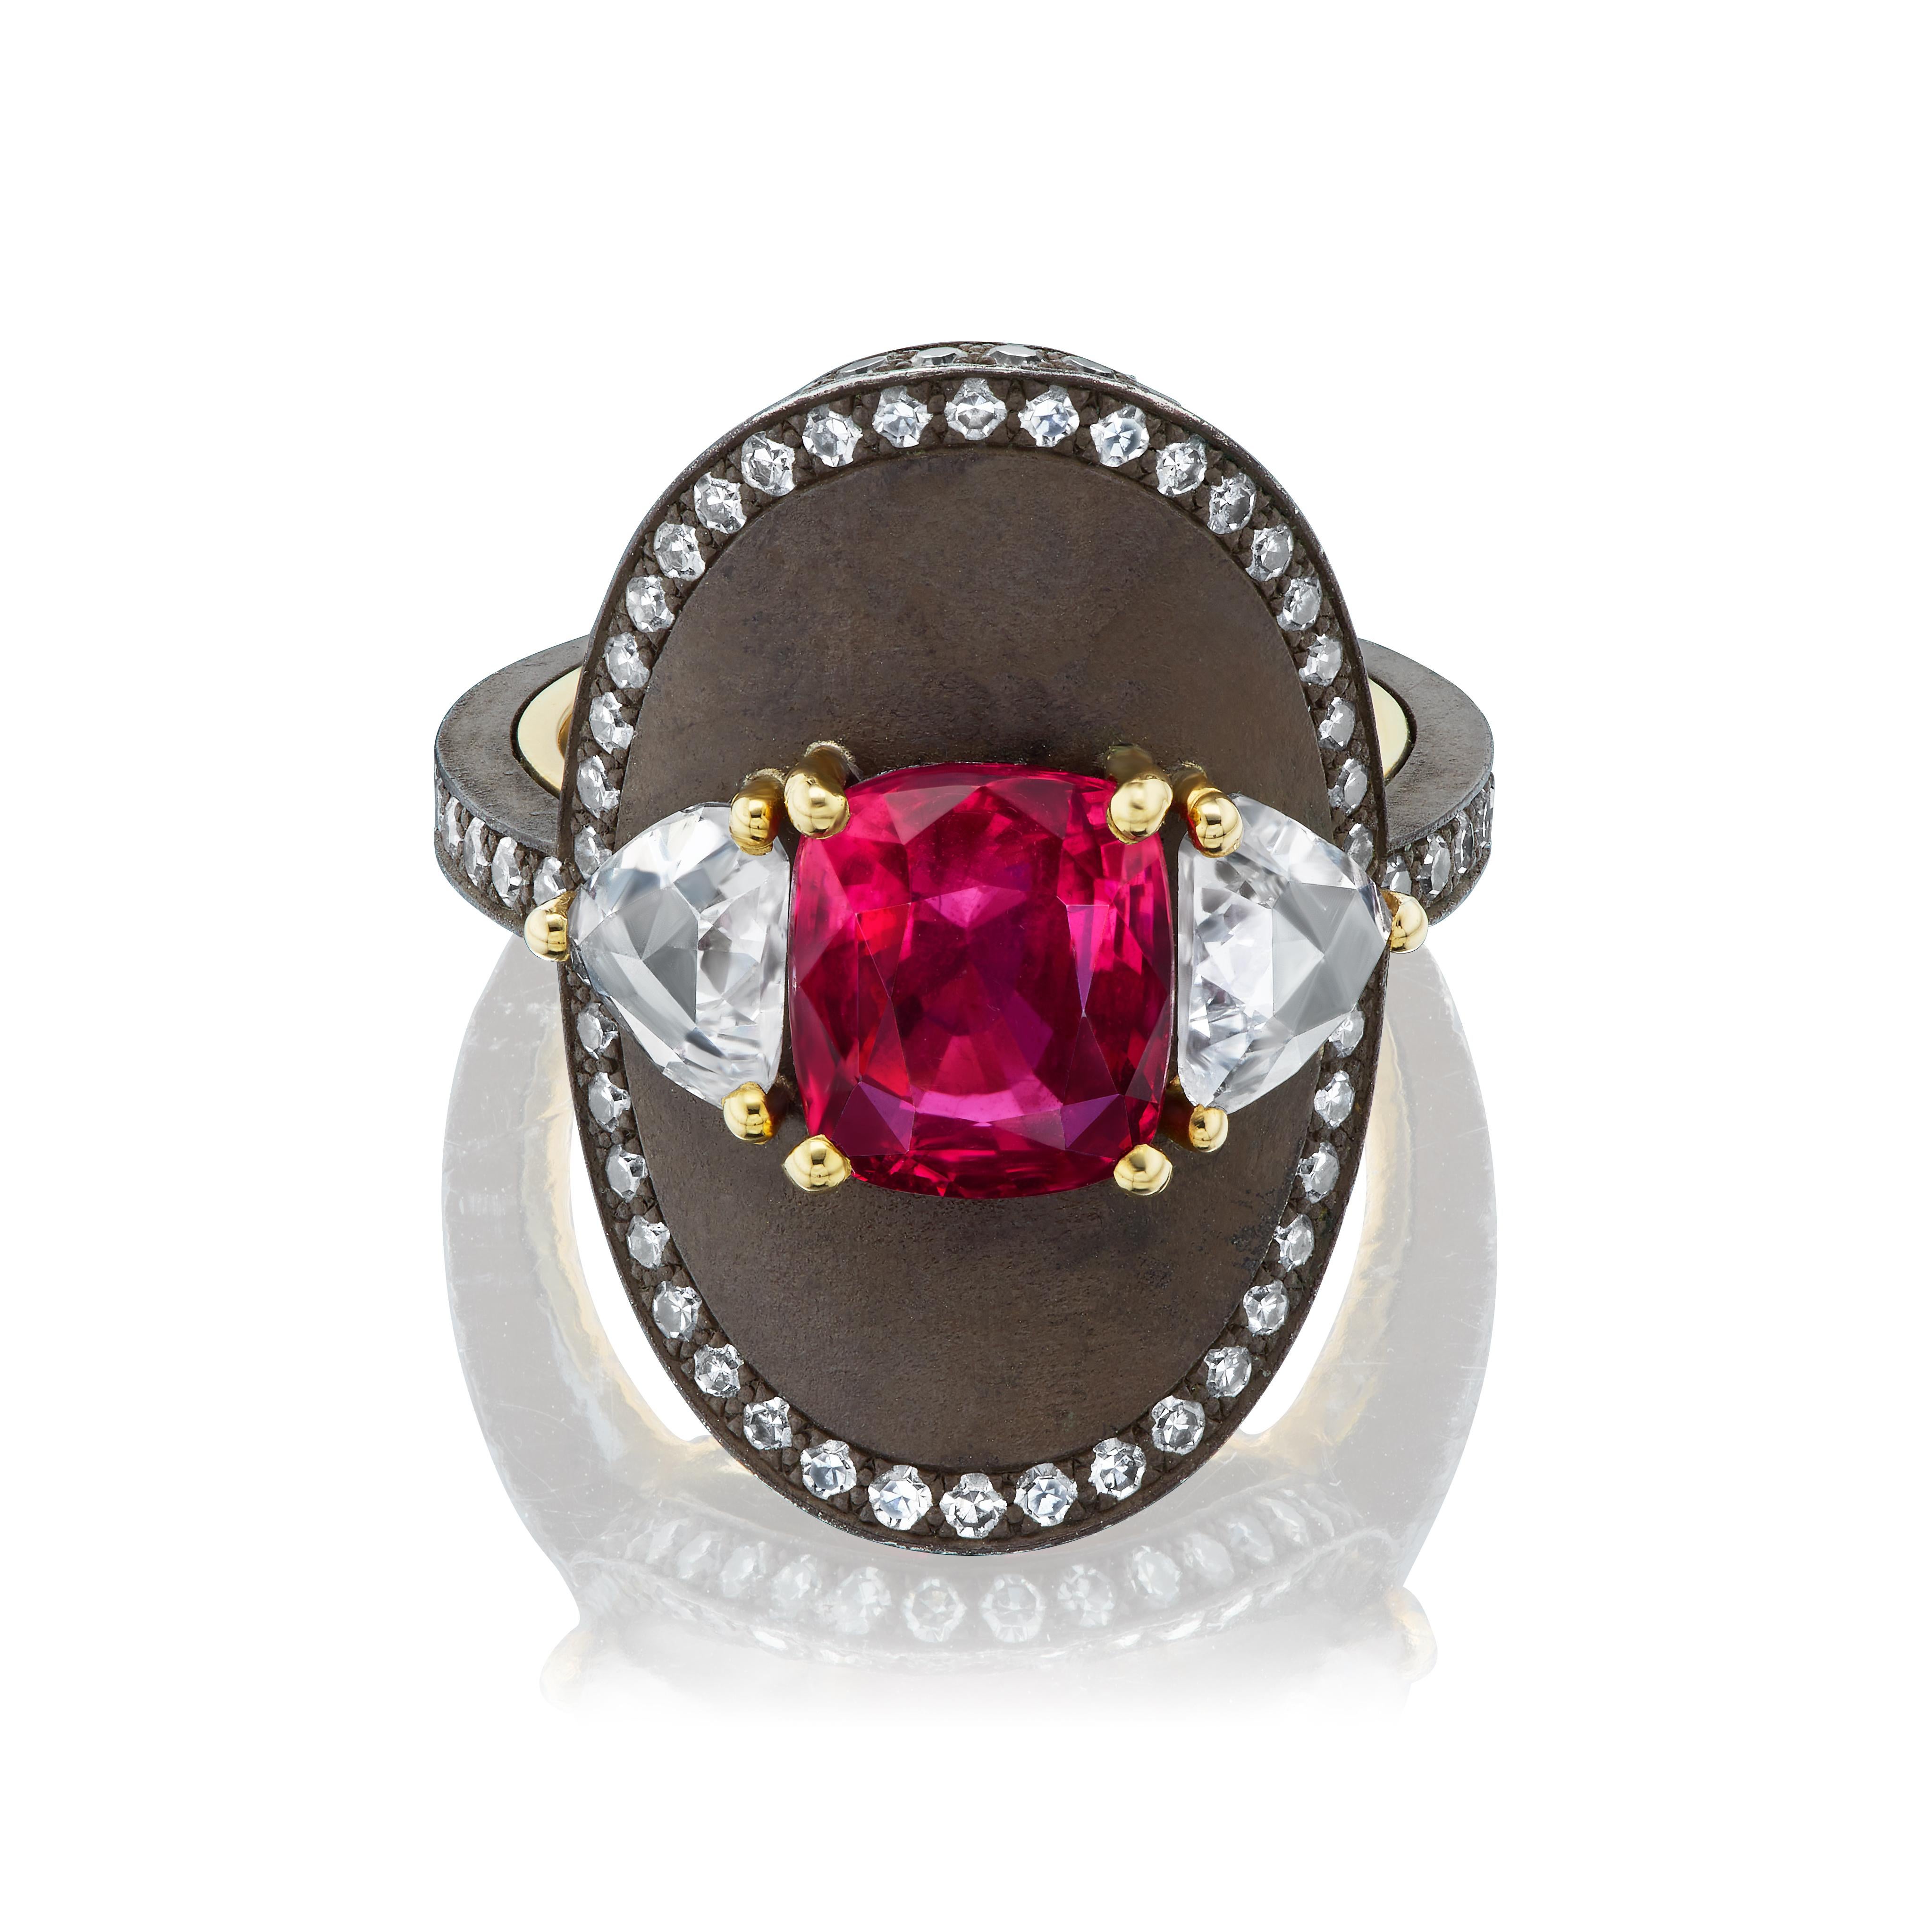 Made by a very fine French atelier that prefers to remain anonymous, this exquisite ring features a vivid red cushion cut red spinel from Tanzania (4.36cts) and a wonderful pair of antique cut diamonds (2 triangles 1.24cts total weight).  The